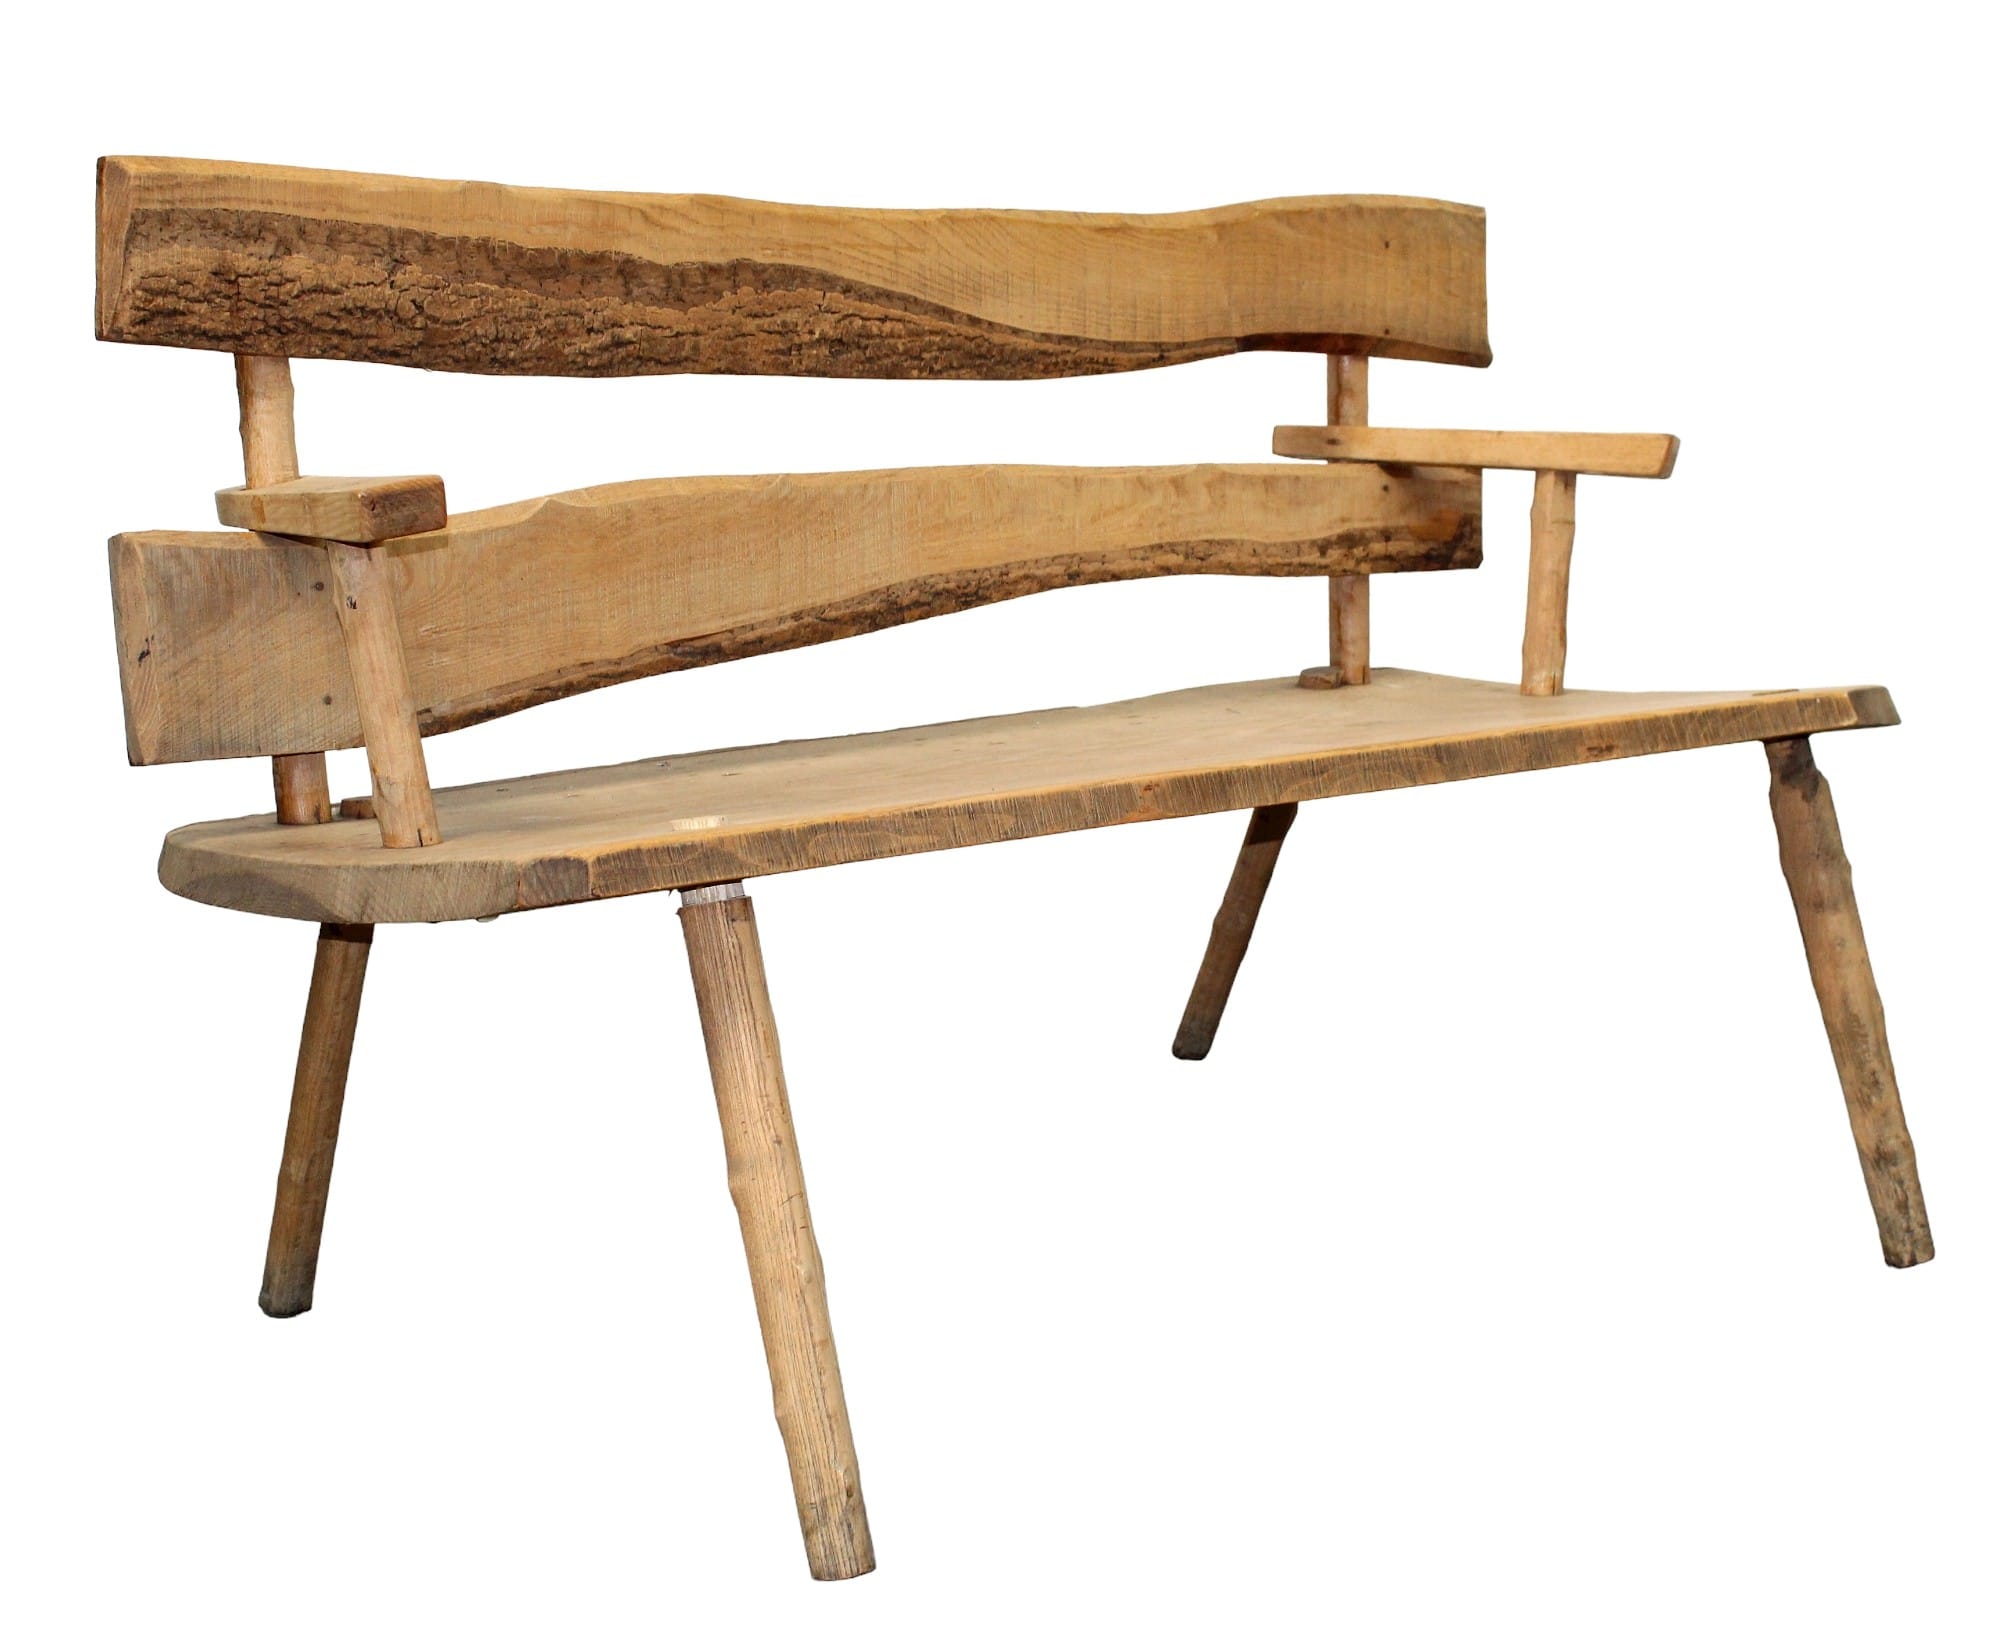 French naturalistic bench in chestnut